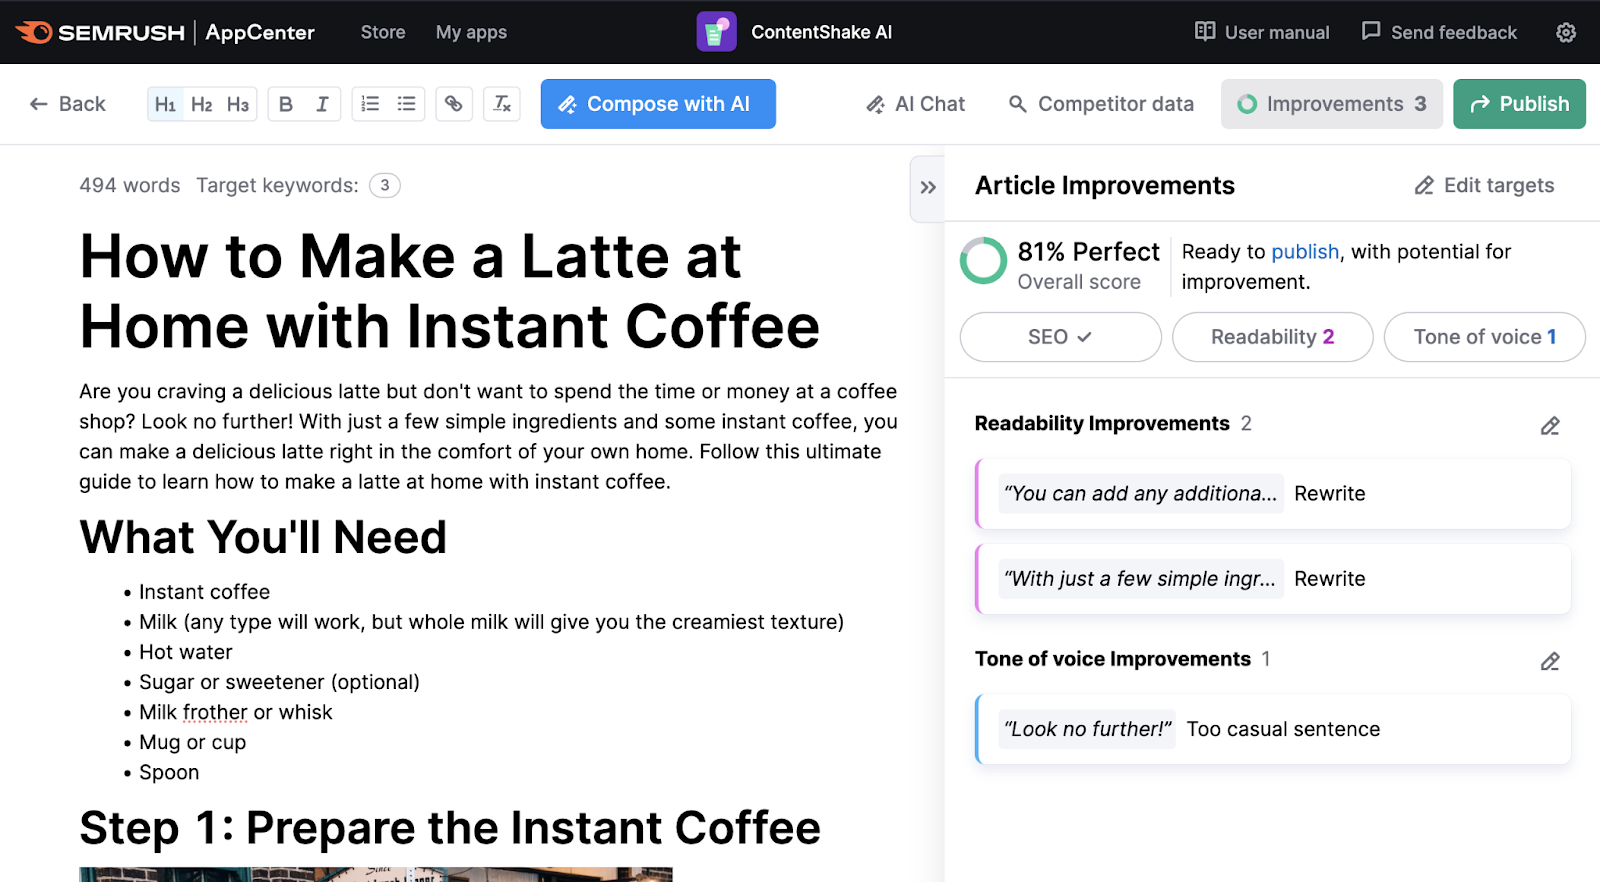 "How to Make a Latte at Home with Instant Coffee" content in ContentShake AI